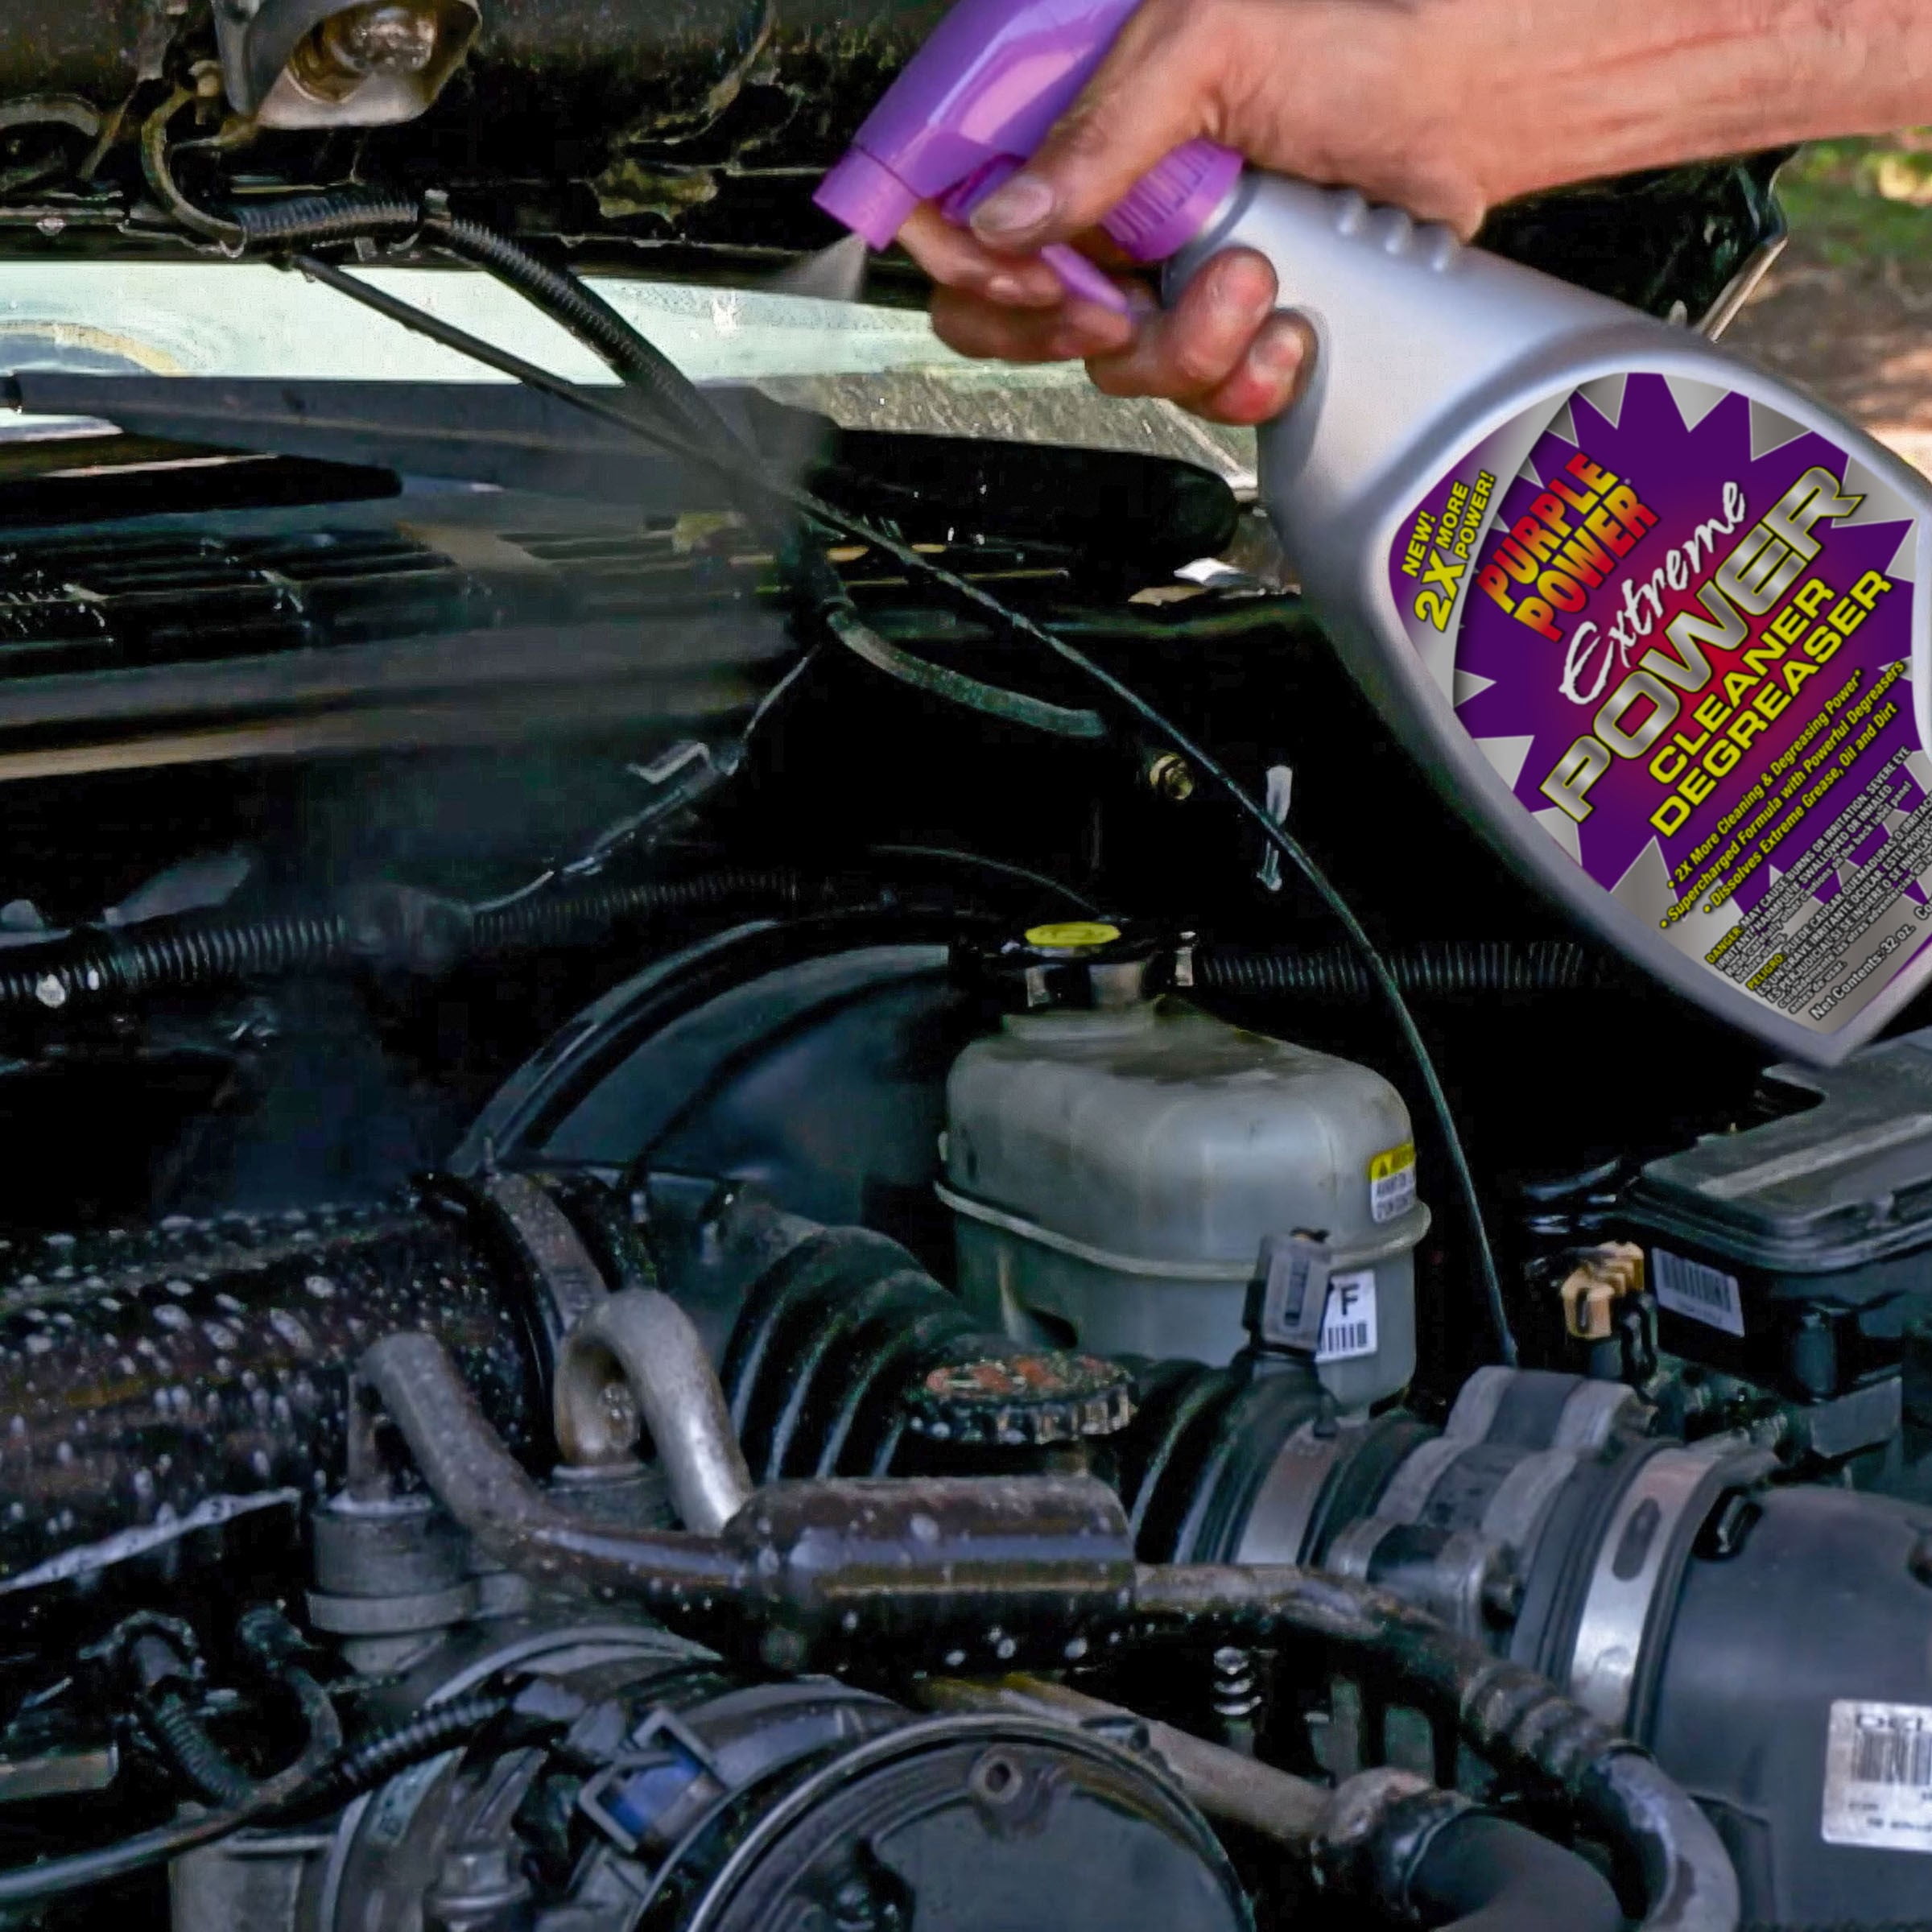  Purple Power (4320P) Industrial Strength Cleaner and Degreaser  - 1 Gallon, 128 Fl Oz (Pack of 1) : Industrial & Scientific